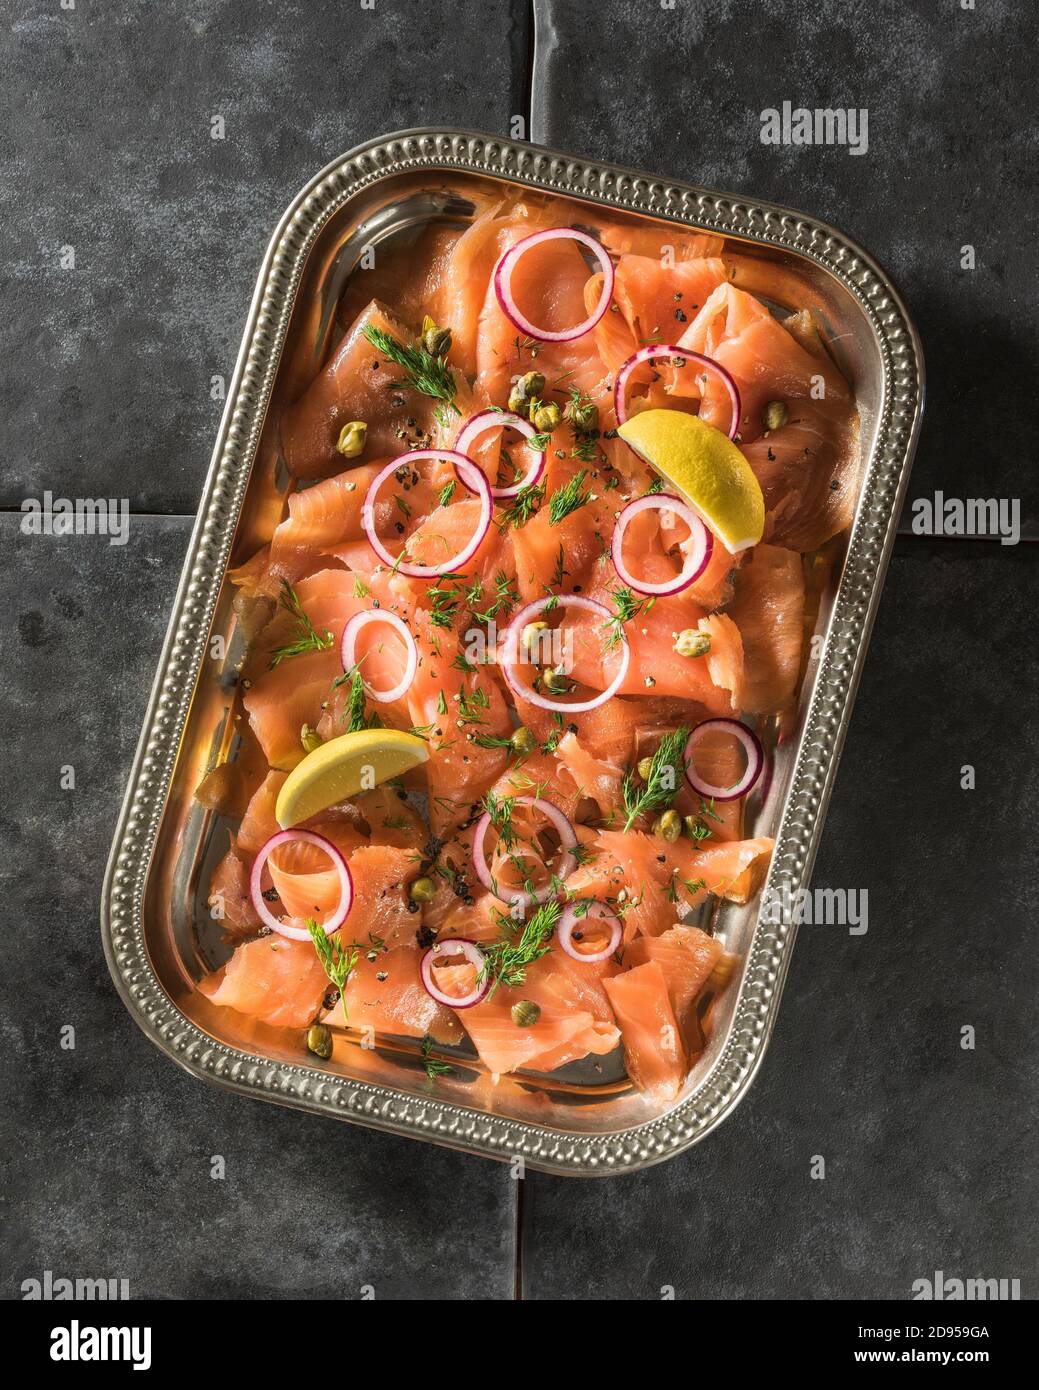 Smoked salmon sliced on tray with lemon, capers and dill. Stock Photo